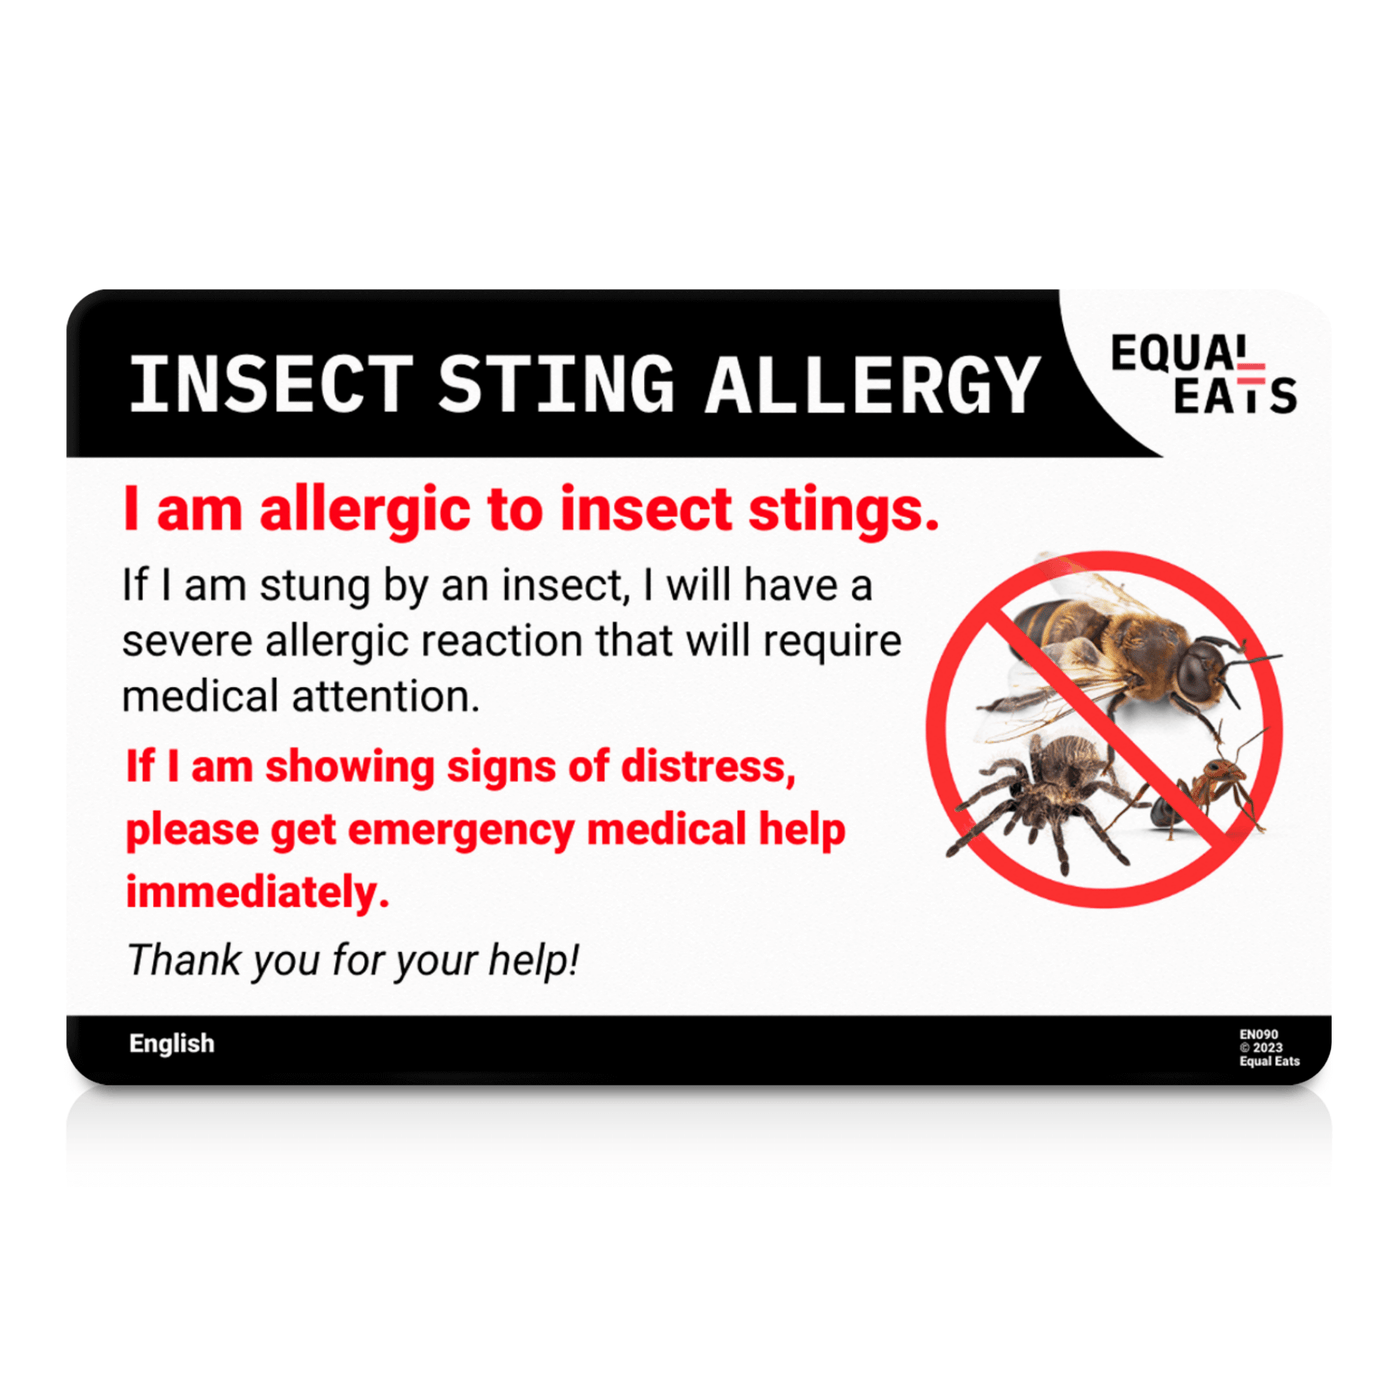 Croatian Insect Sting Allergy Card